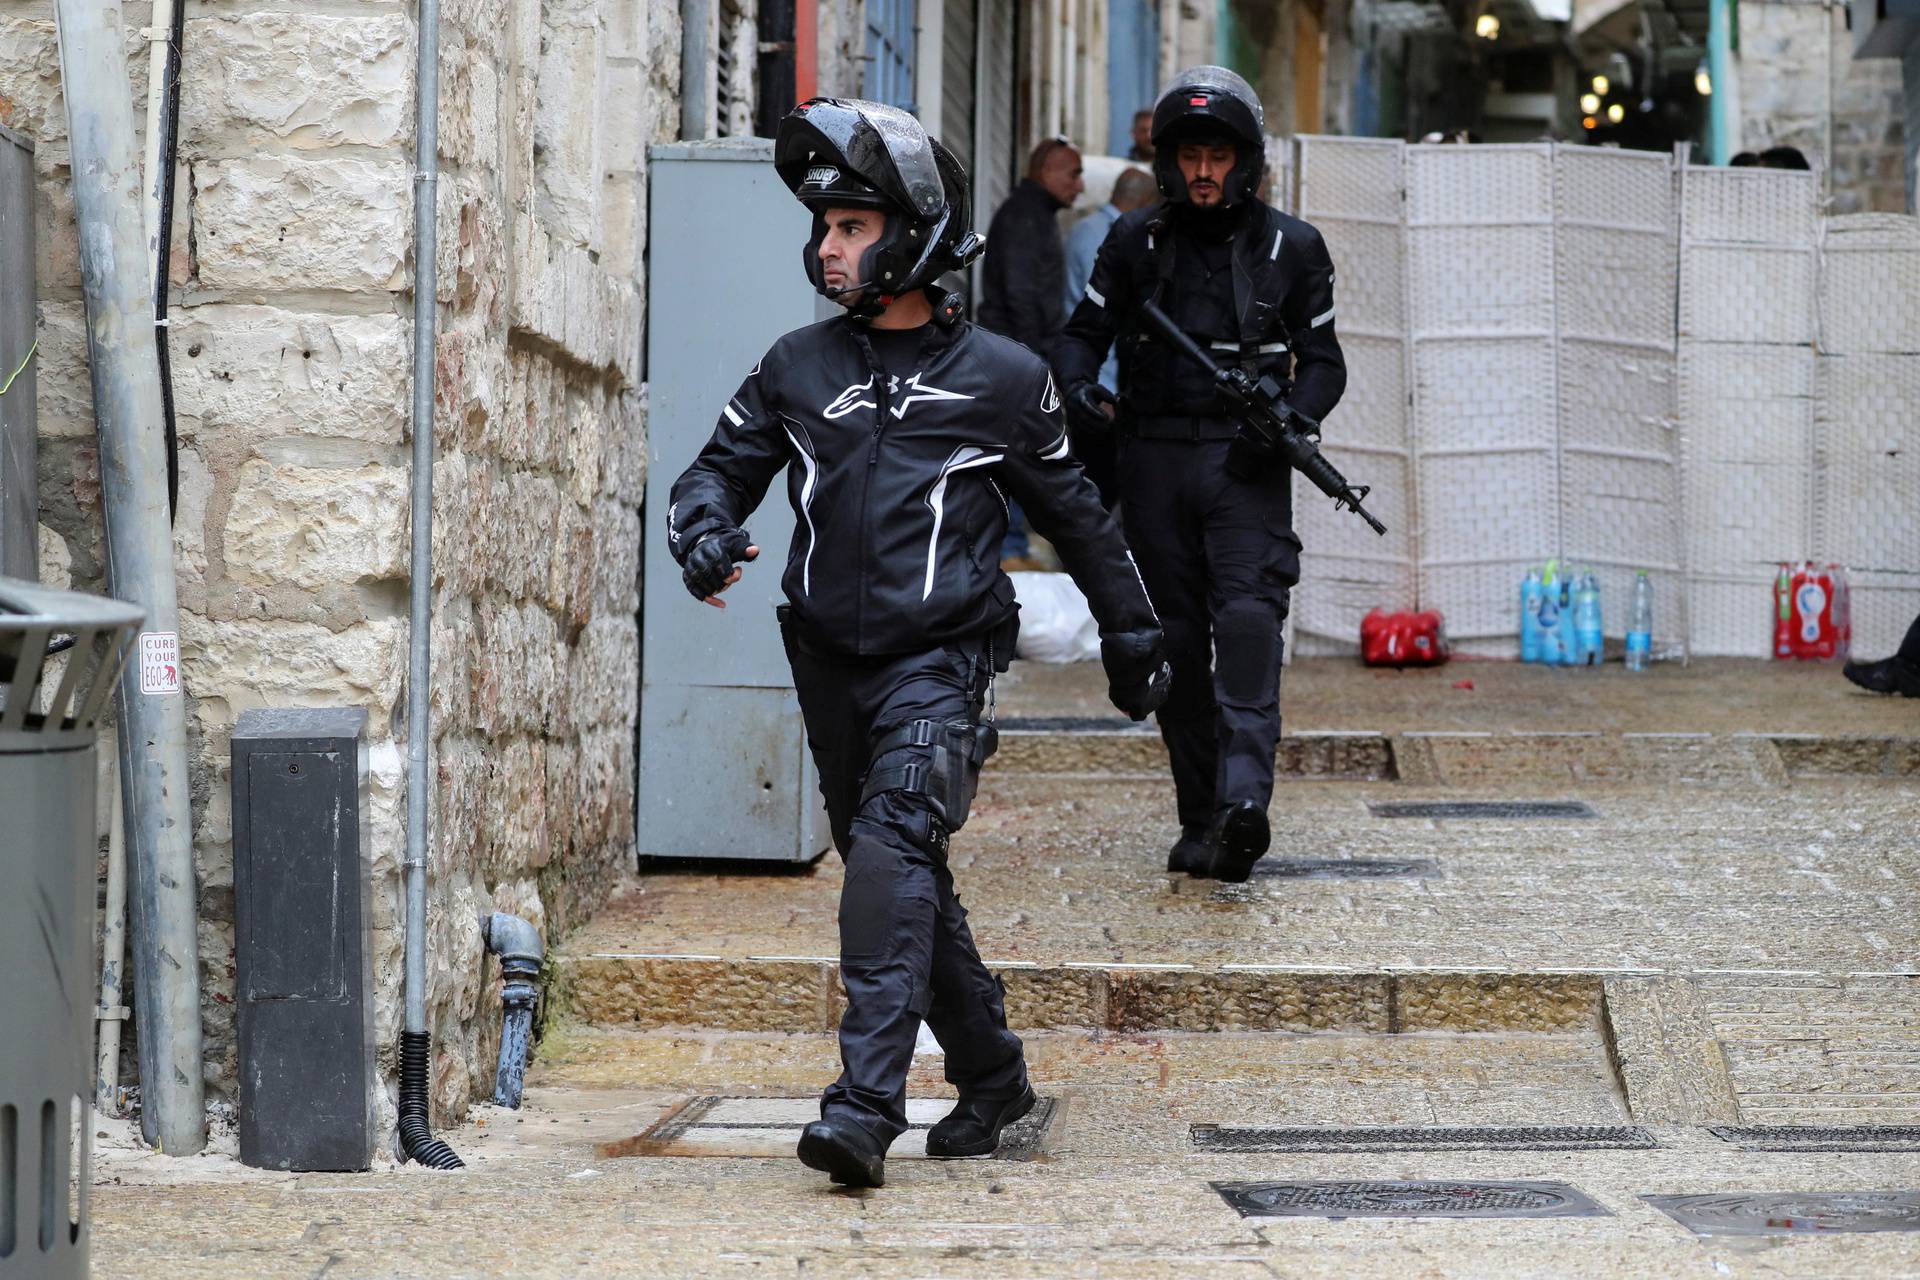 Israeli police officers patrol the site of a shooting incident in Jerusalem's Old City